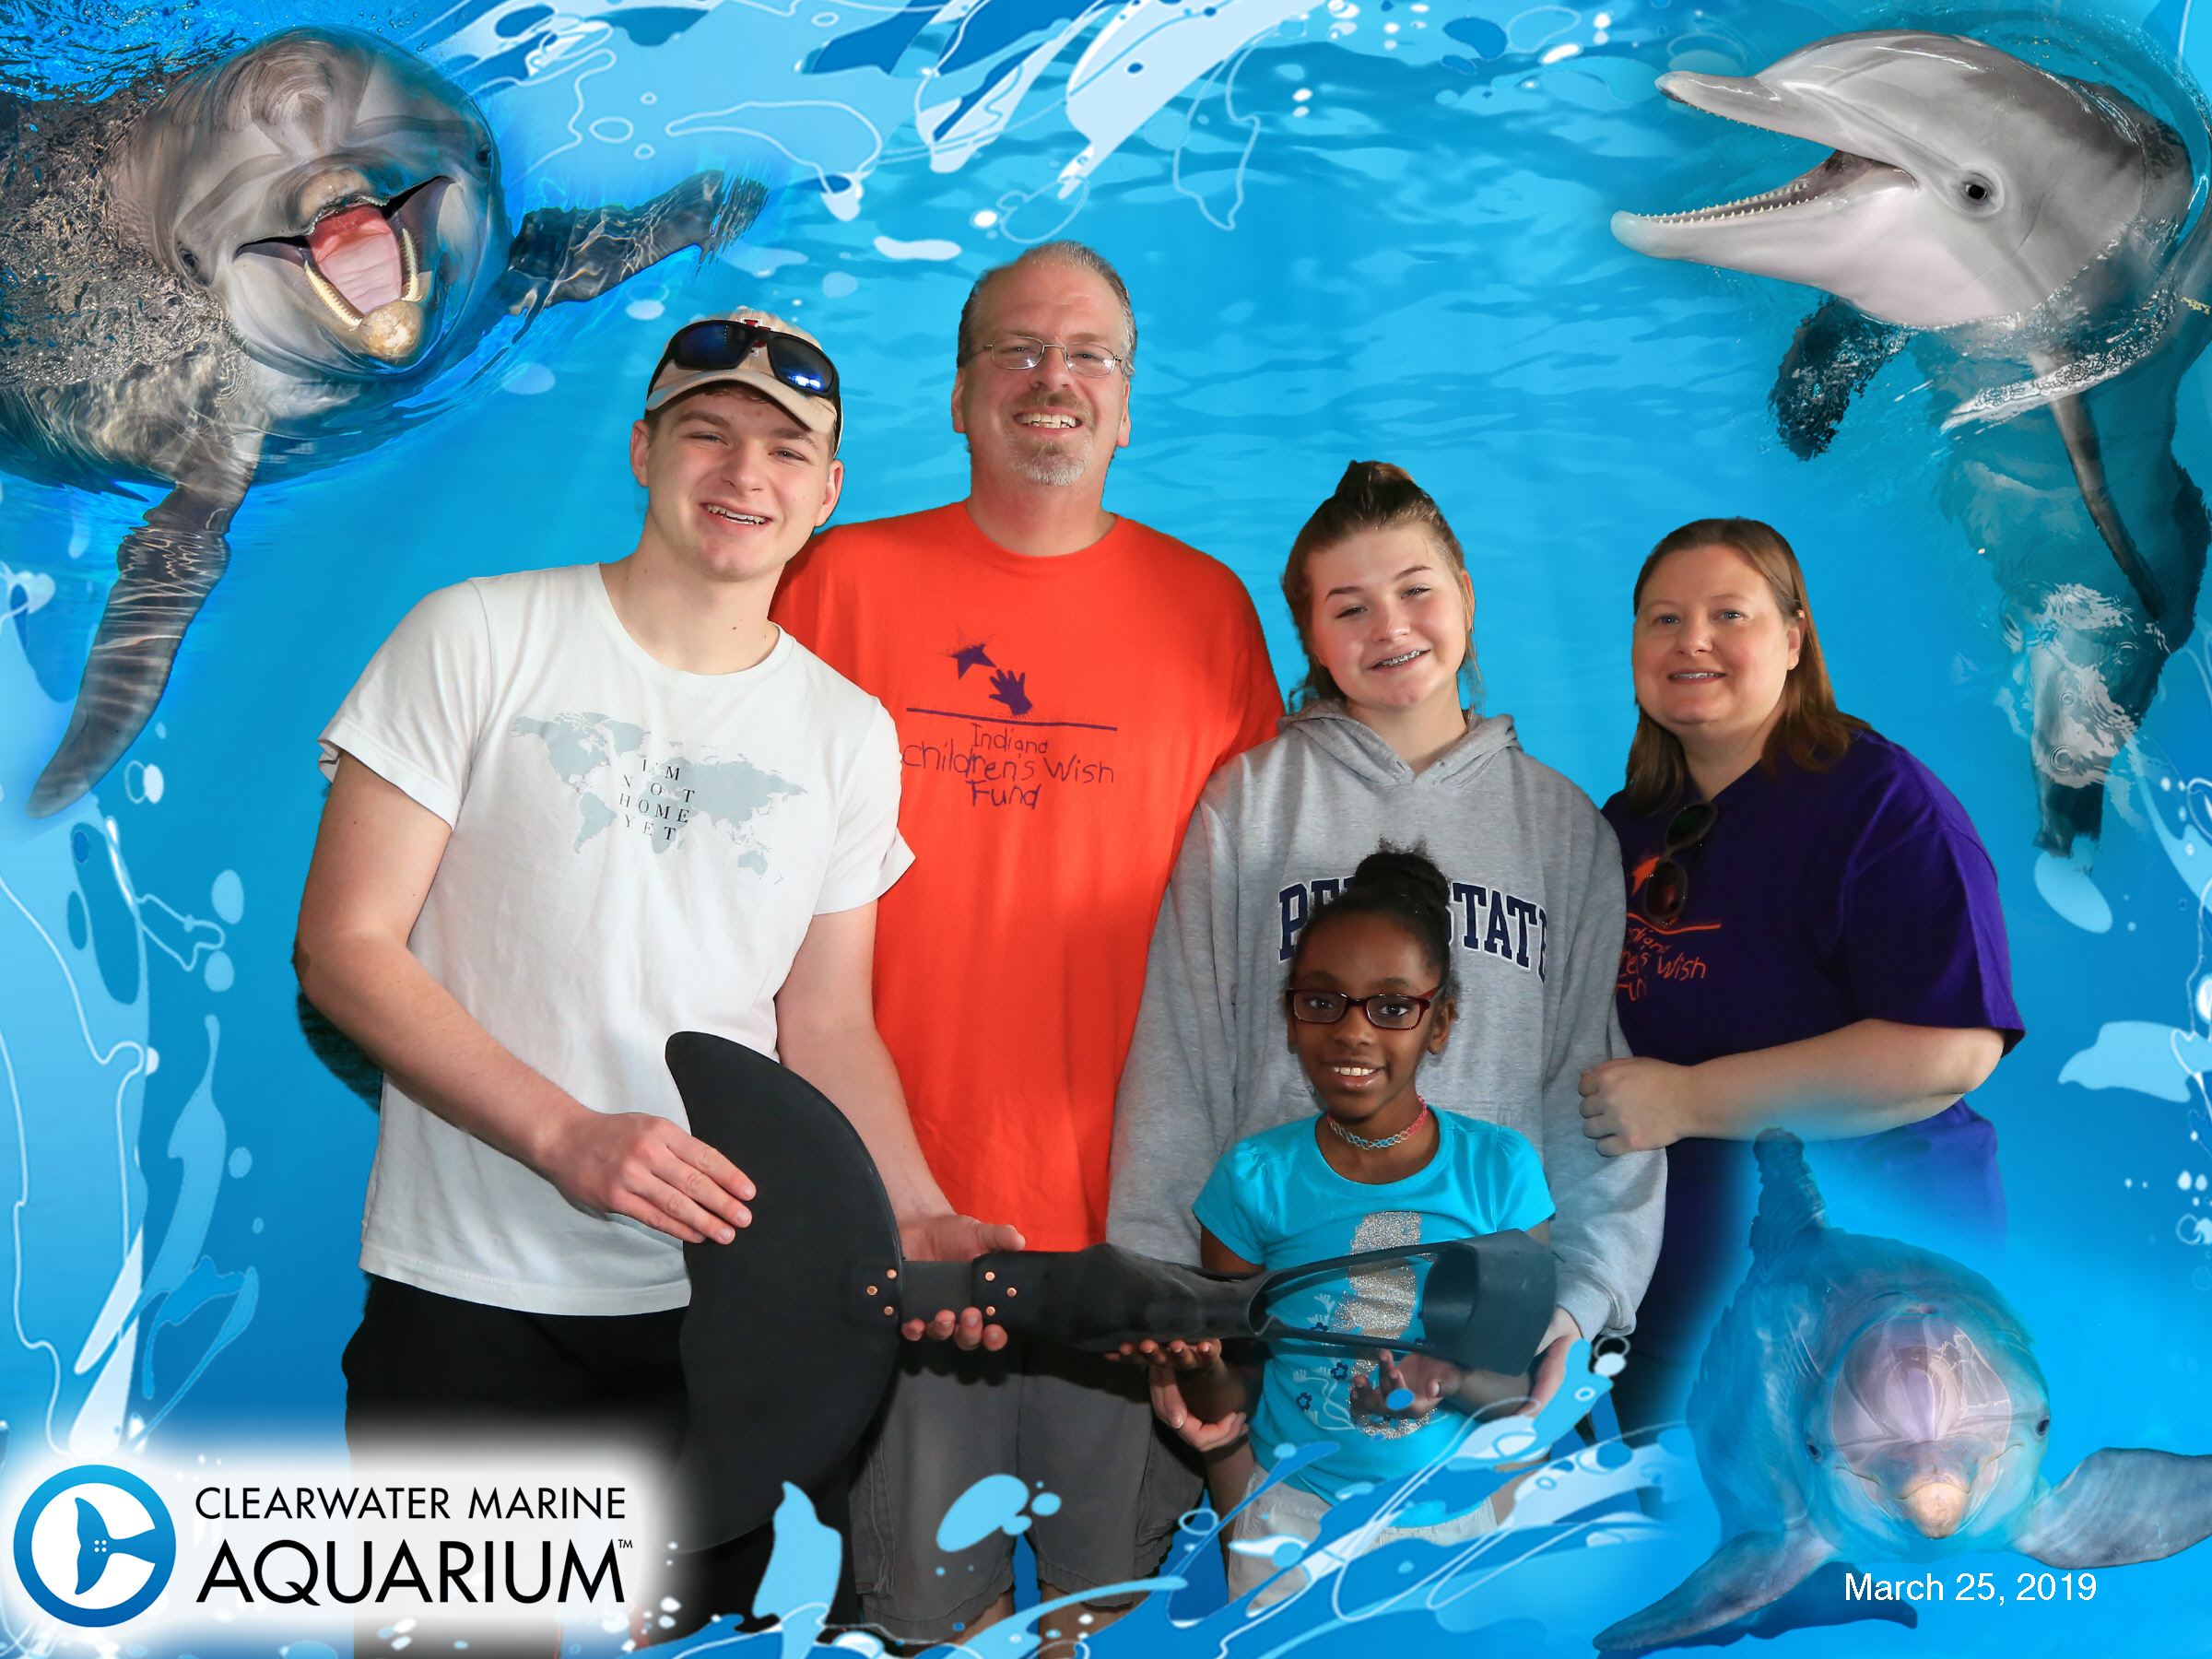 Family picture at the Clearwater Marine Aquarium in Clearwater, Florida